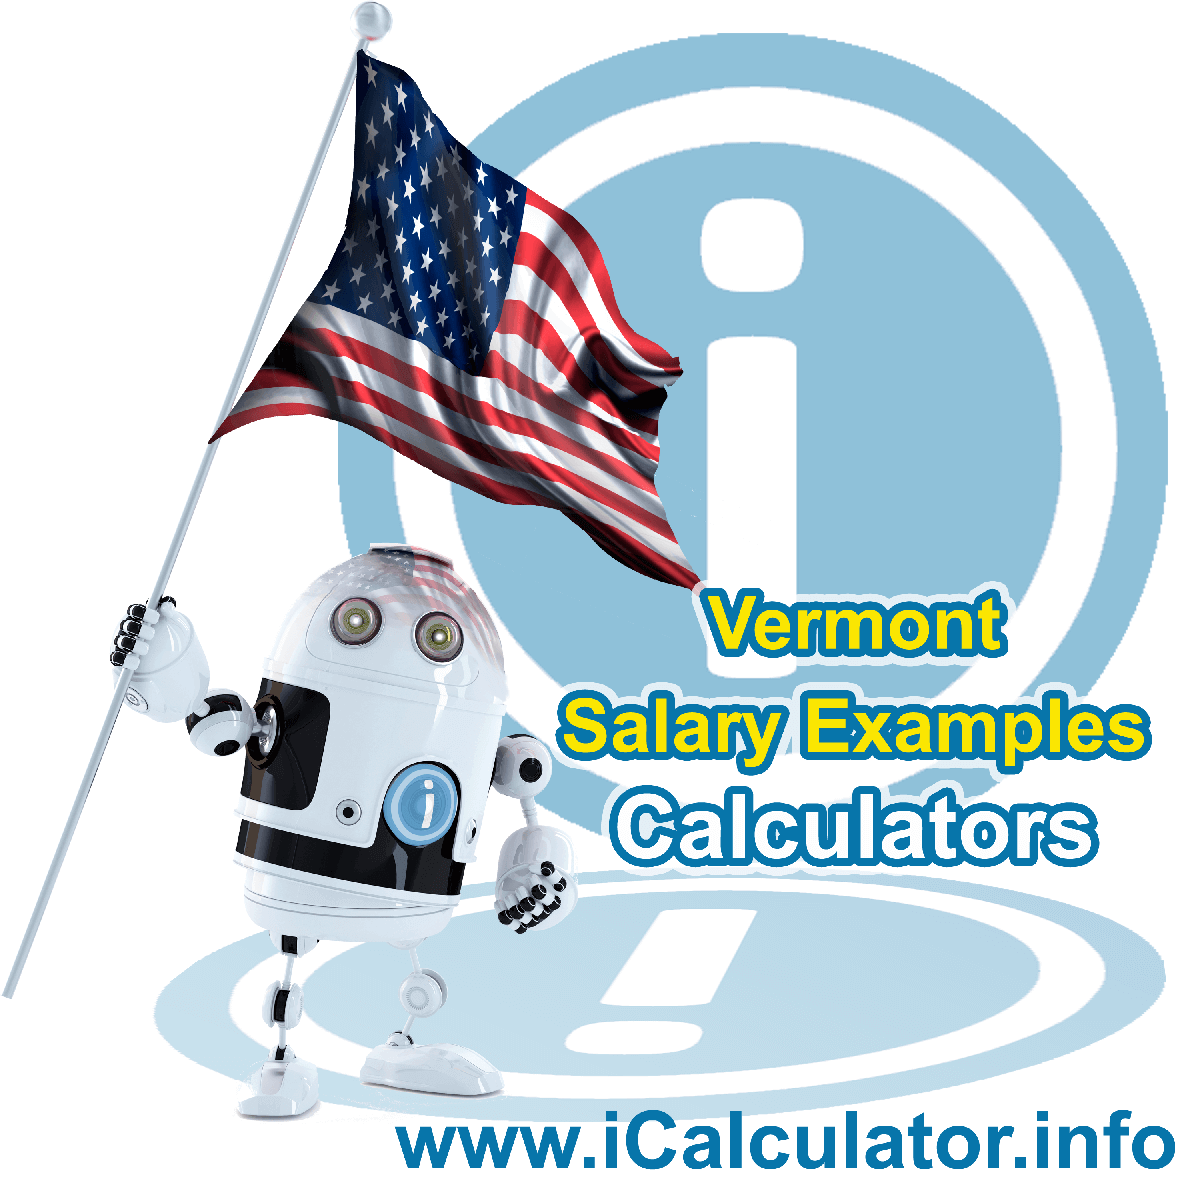 Vermont Salary Example for $ 160,000.00 in 2023 | iCalculator™ | $ 160,000.00 salary example for employee and employer paying Vermont State tincome taxes. Detailed salary after tax calculation including Vermont State Tax, Federal State Tax, Medicare Deductions, Social Security, Capital Gains and other income tax and salary deductions complete with supporting Vermont state tax tables 